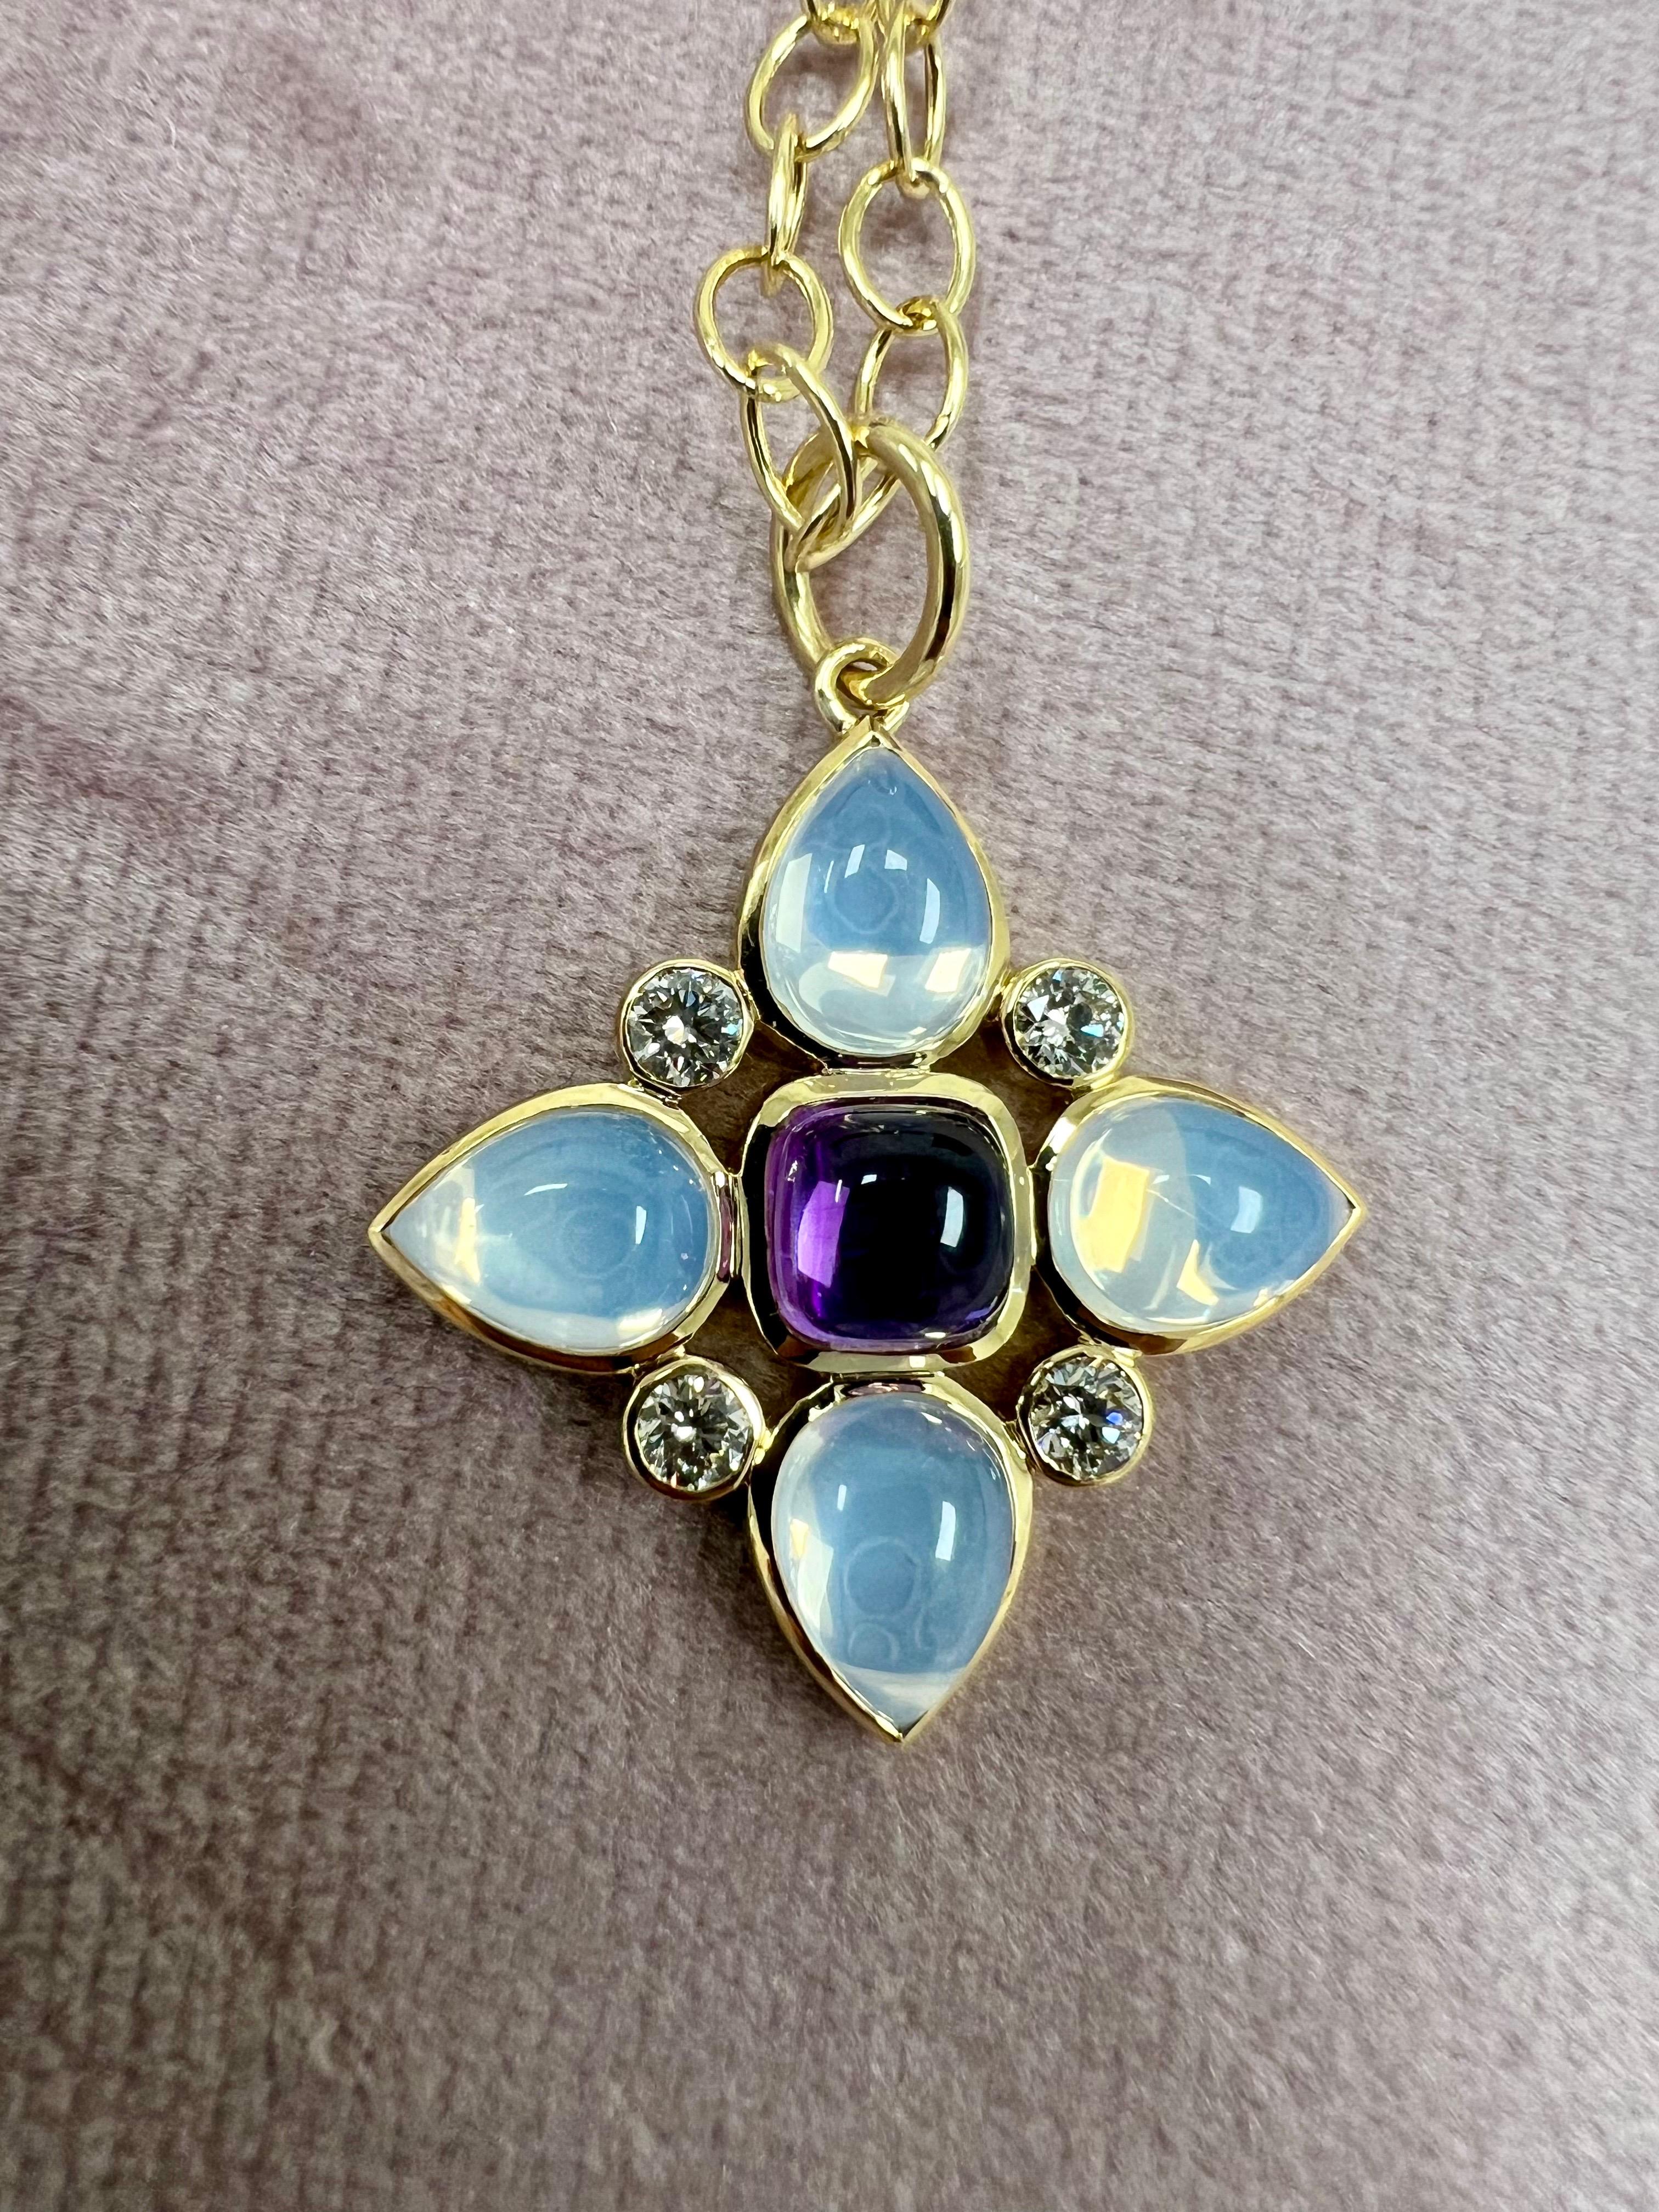 Created in 18 karat yellow gold
Amethyst 1.50 carats approx.
Moon Quartz 4.50 carats approx.
Diamonds 0.45 carat approx.
Chain sold separately

Enrobing 18 karat yellow gold, an amethyst of 1.50 carats, moon quartz of 4.50 carats, and Diamonds of